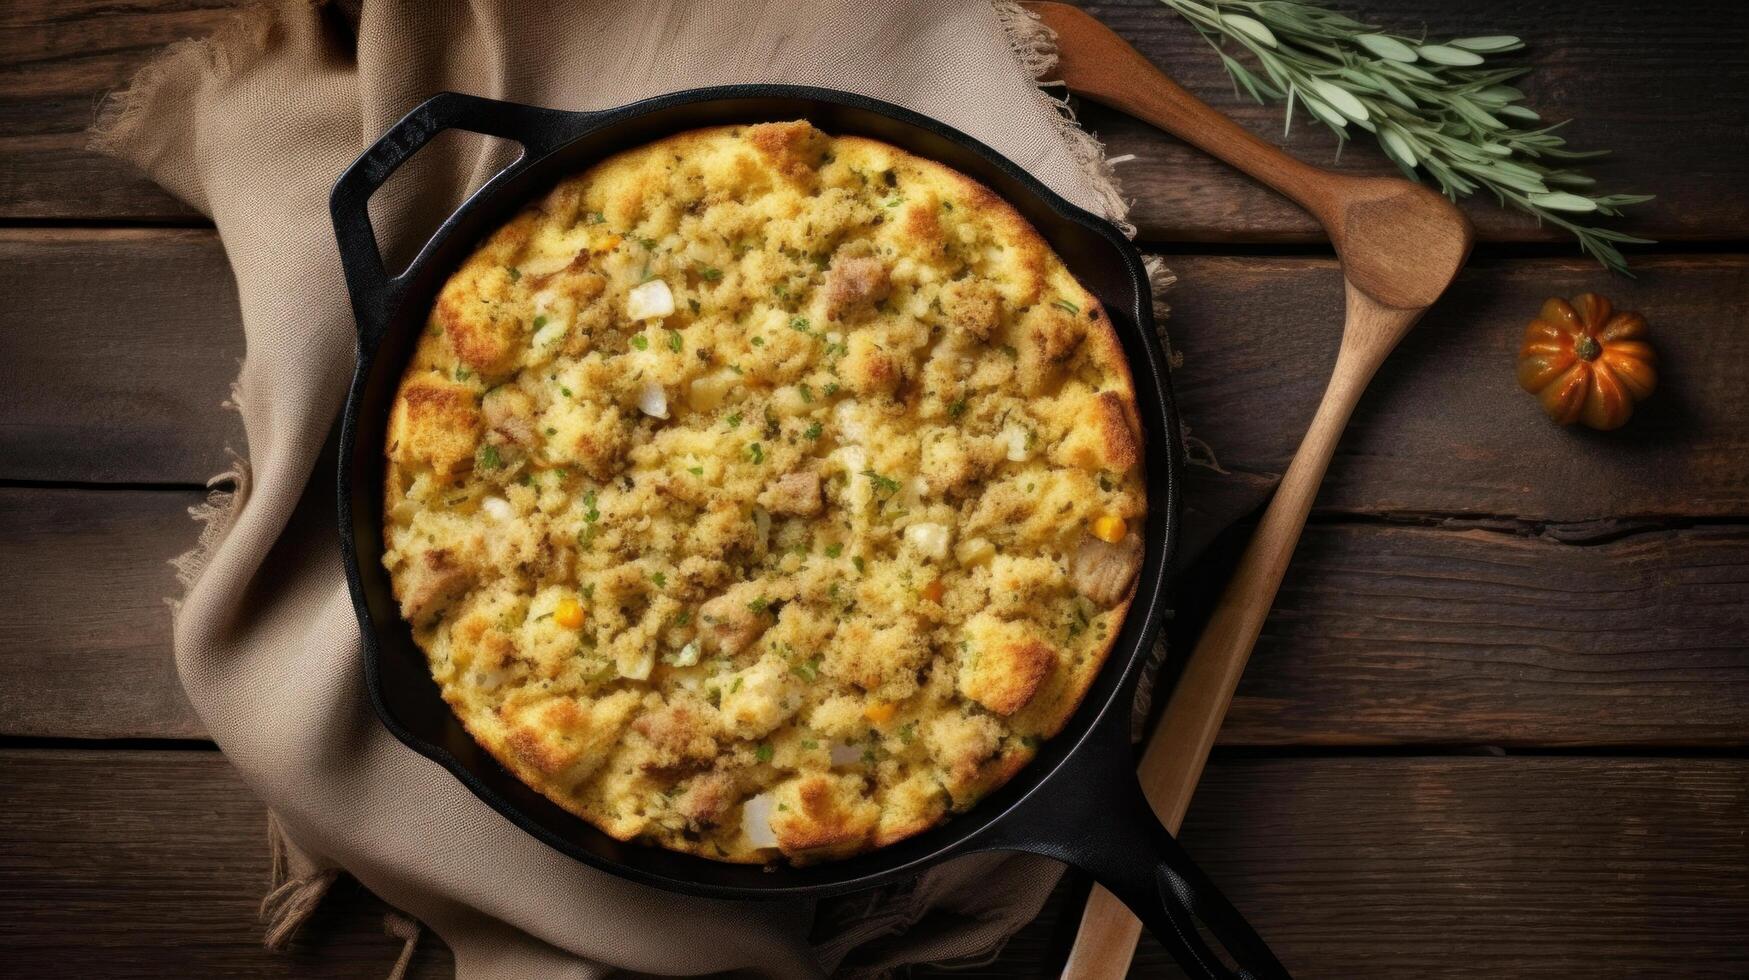 Cornbread Oyster stuffing for Thanksgiving Day. Illustration photo